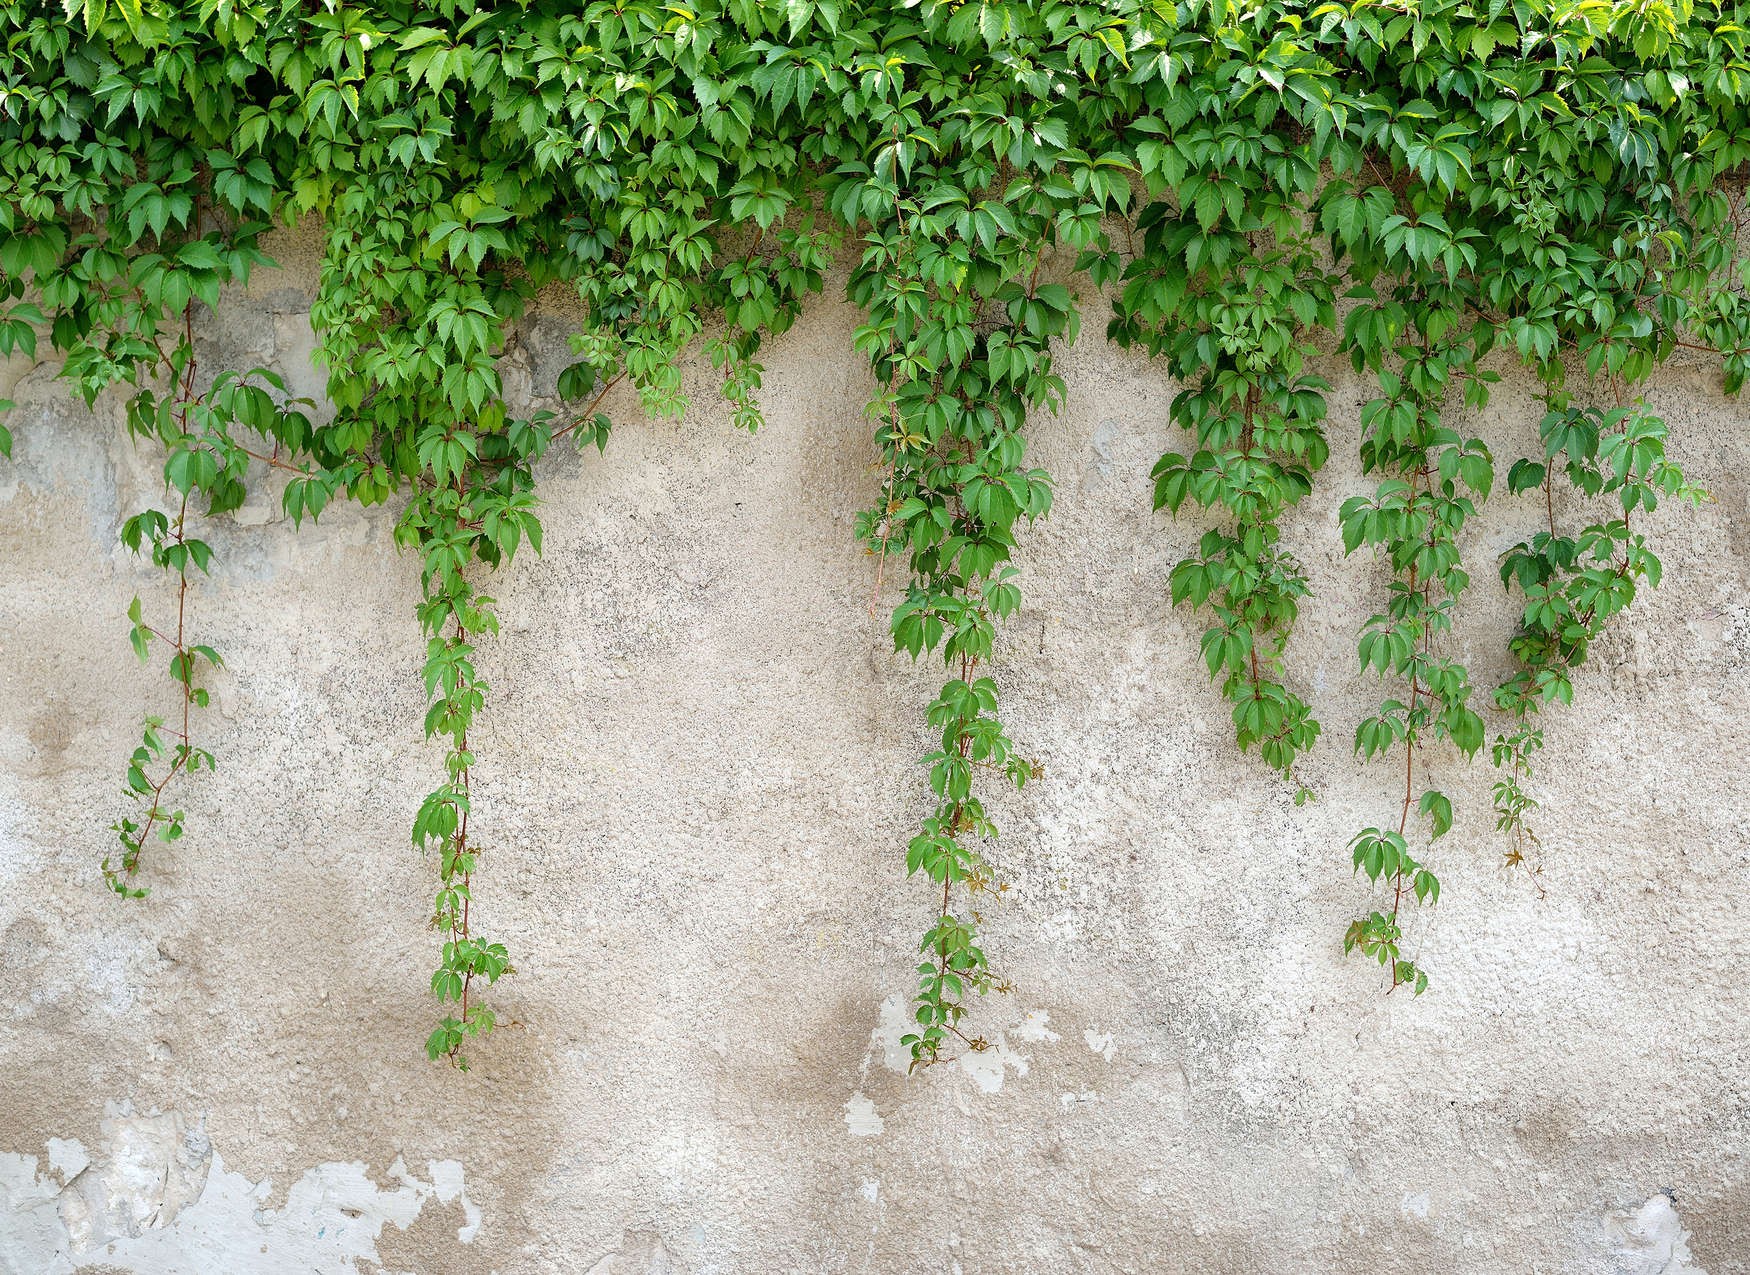             Concrete Wall with Leafy Tendrils - Green, Grey
        